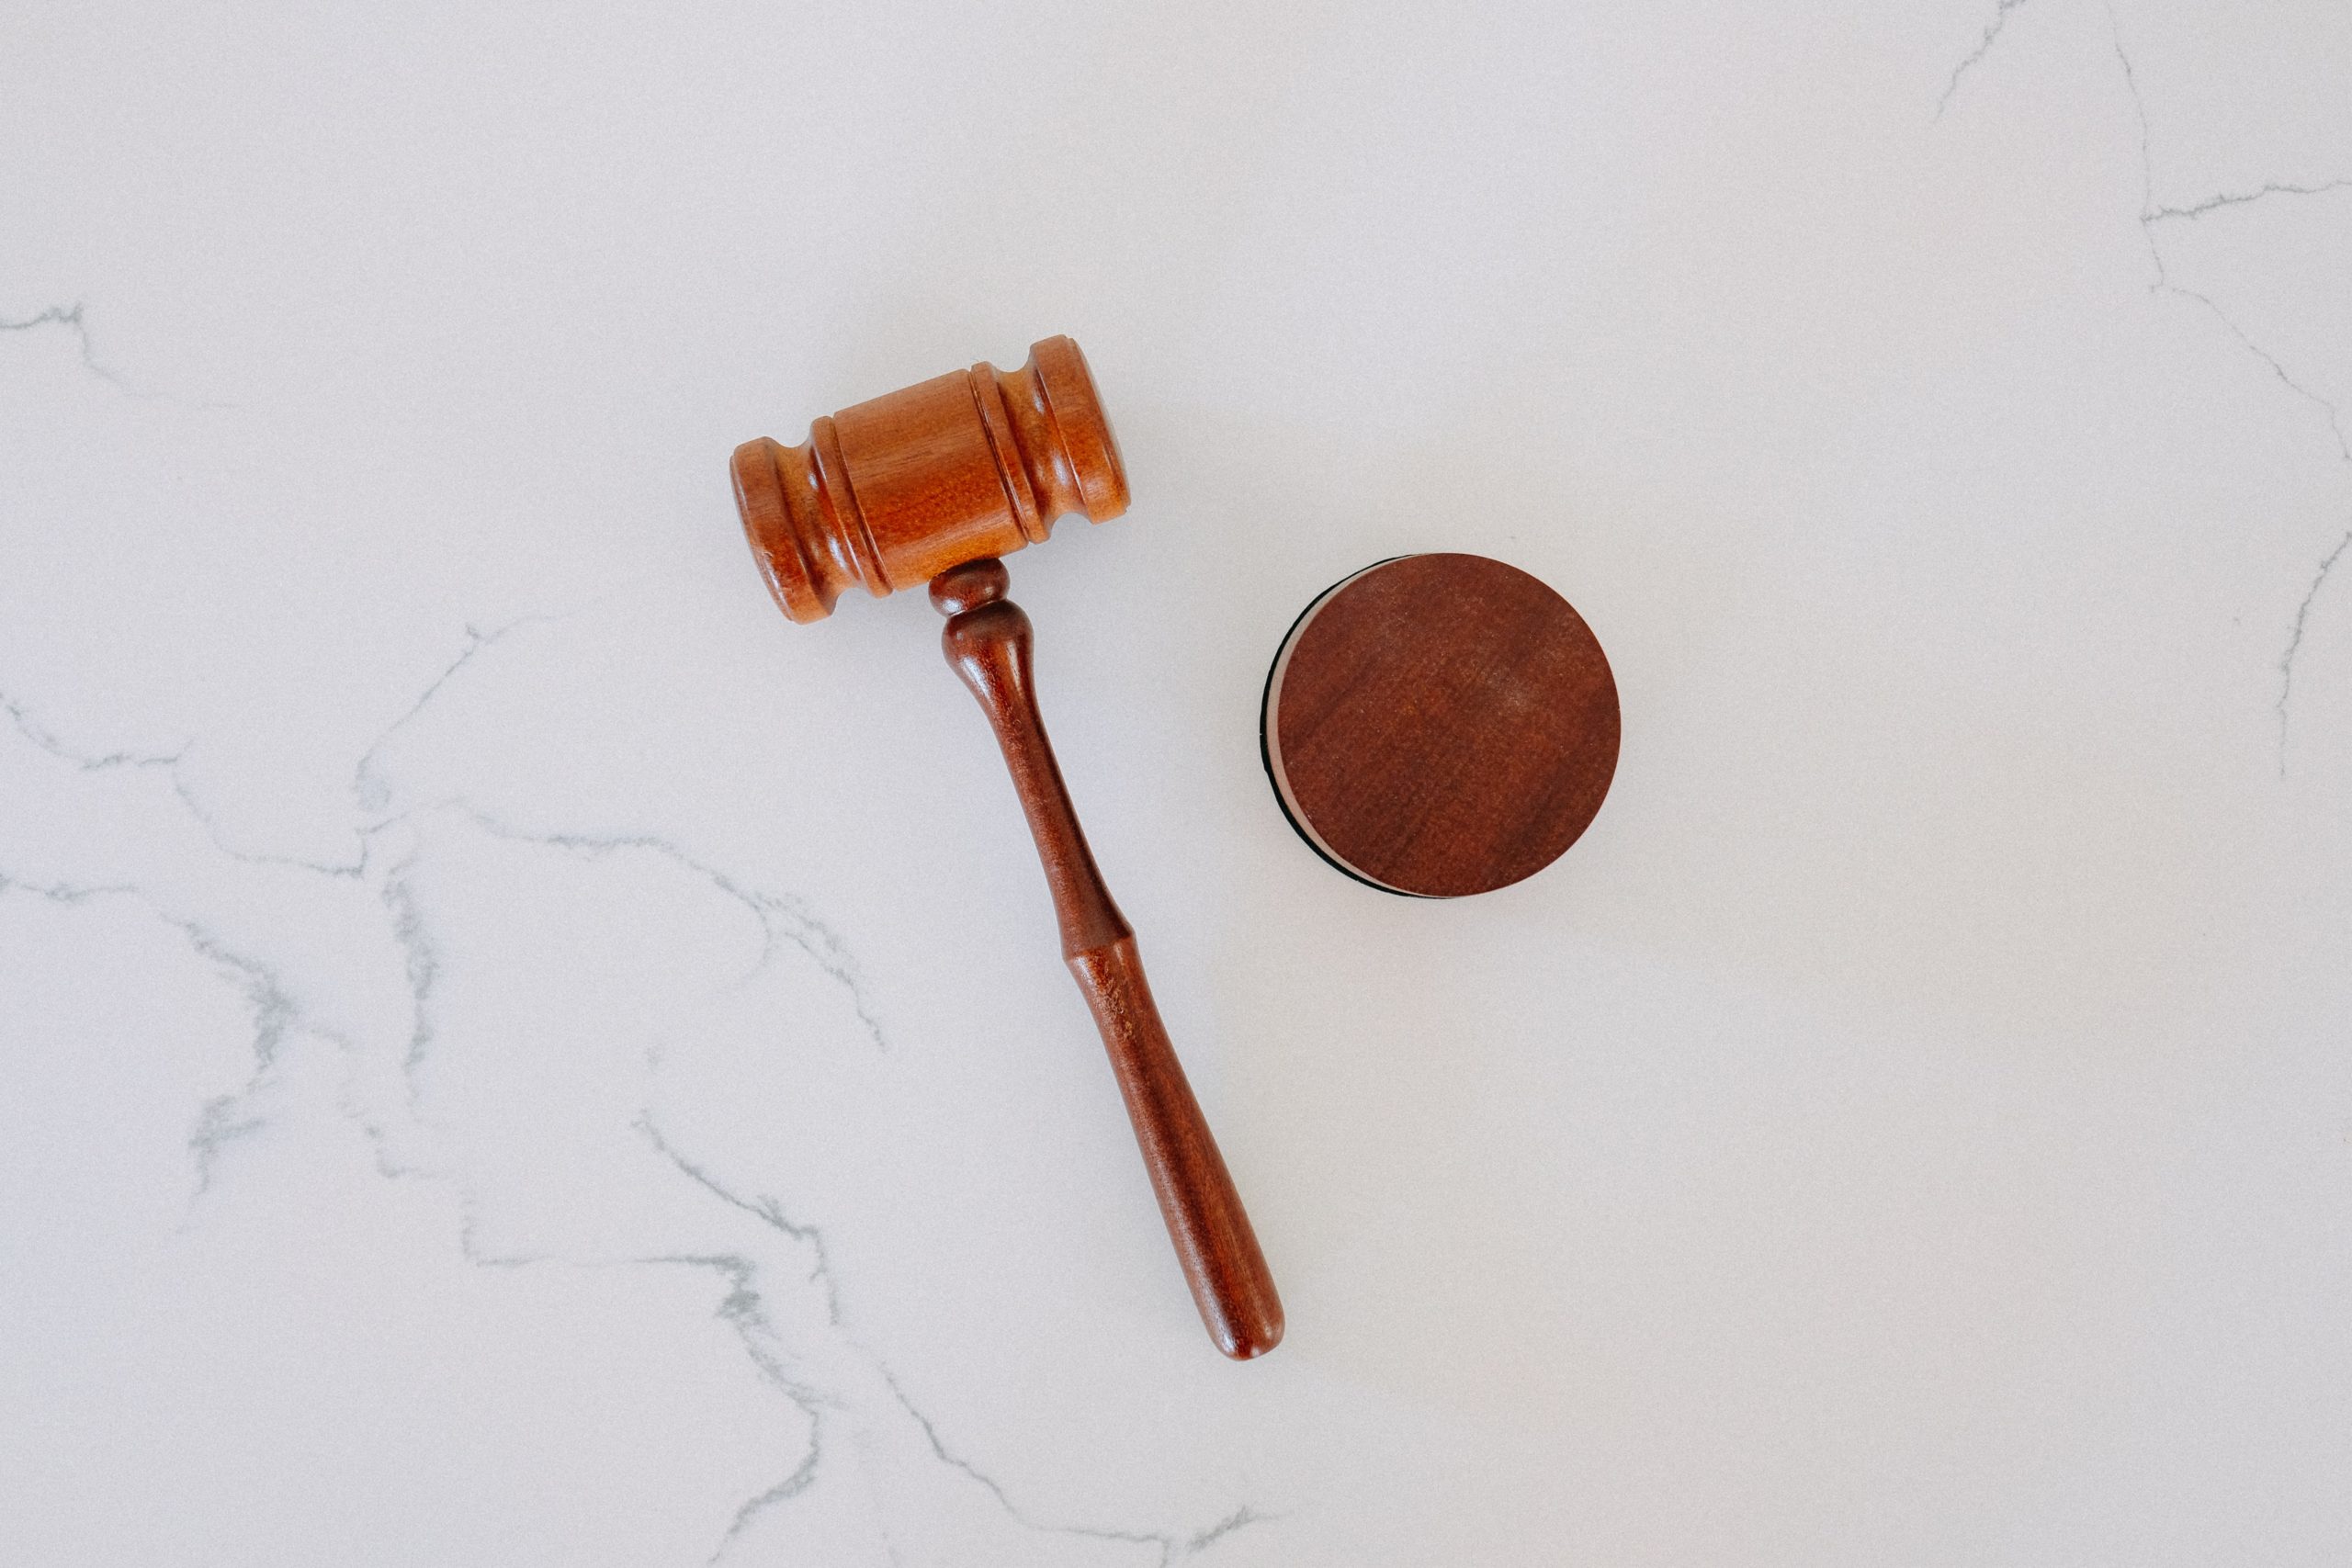 A wooden gavel is pictured from above, resting on a light grey marble surface.